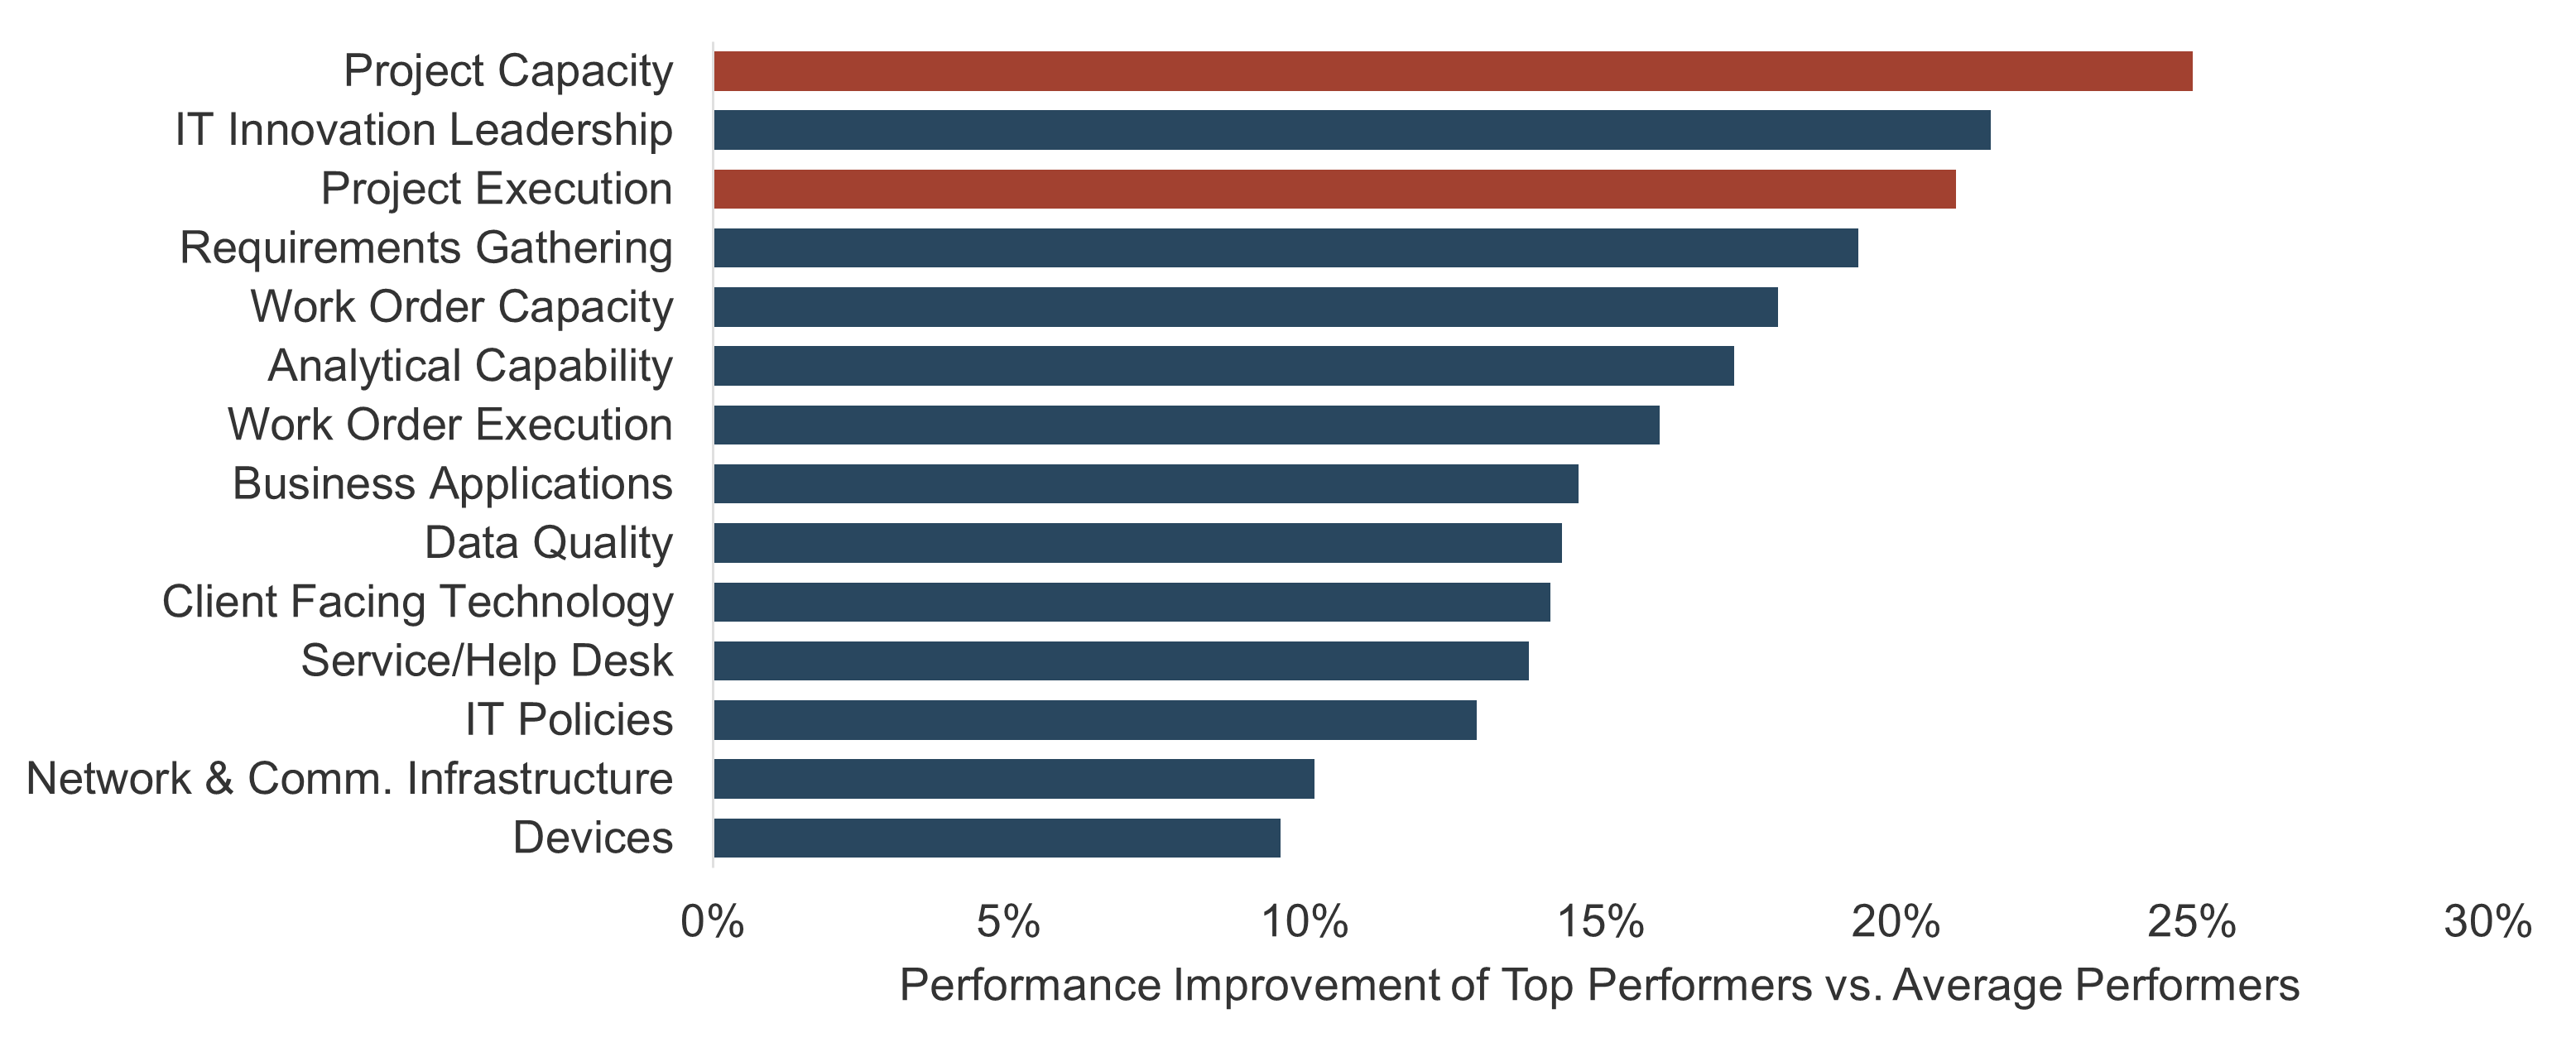 A graph is shown to demonstrate the relationship with project management and high IT performance.